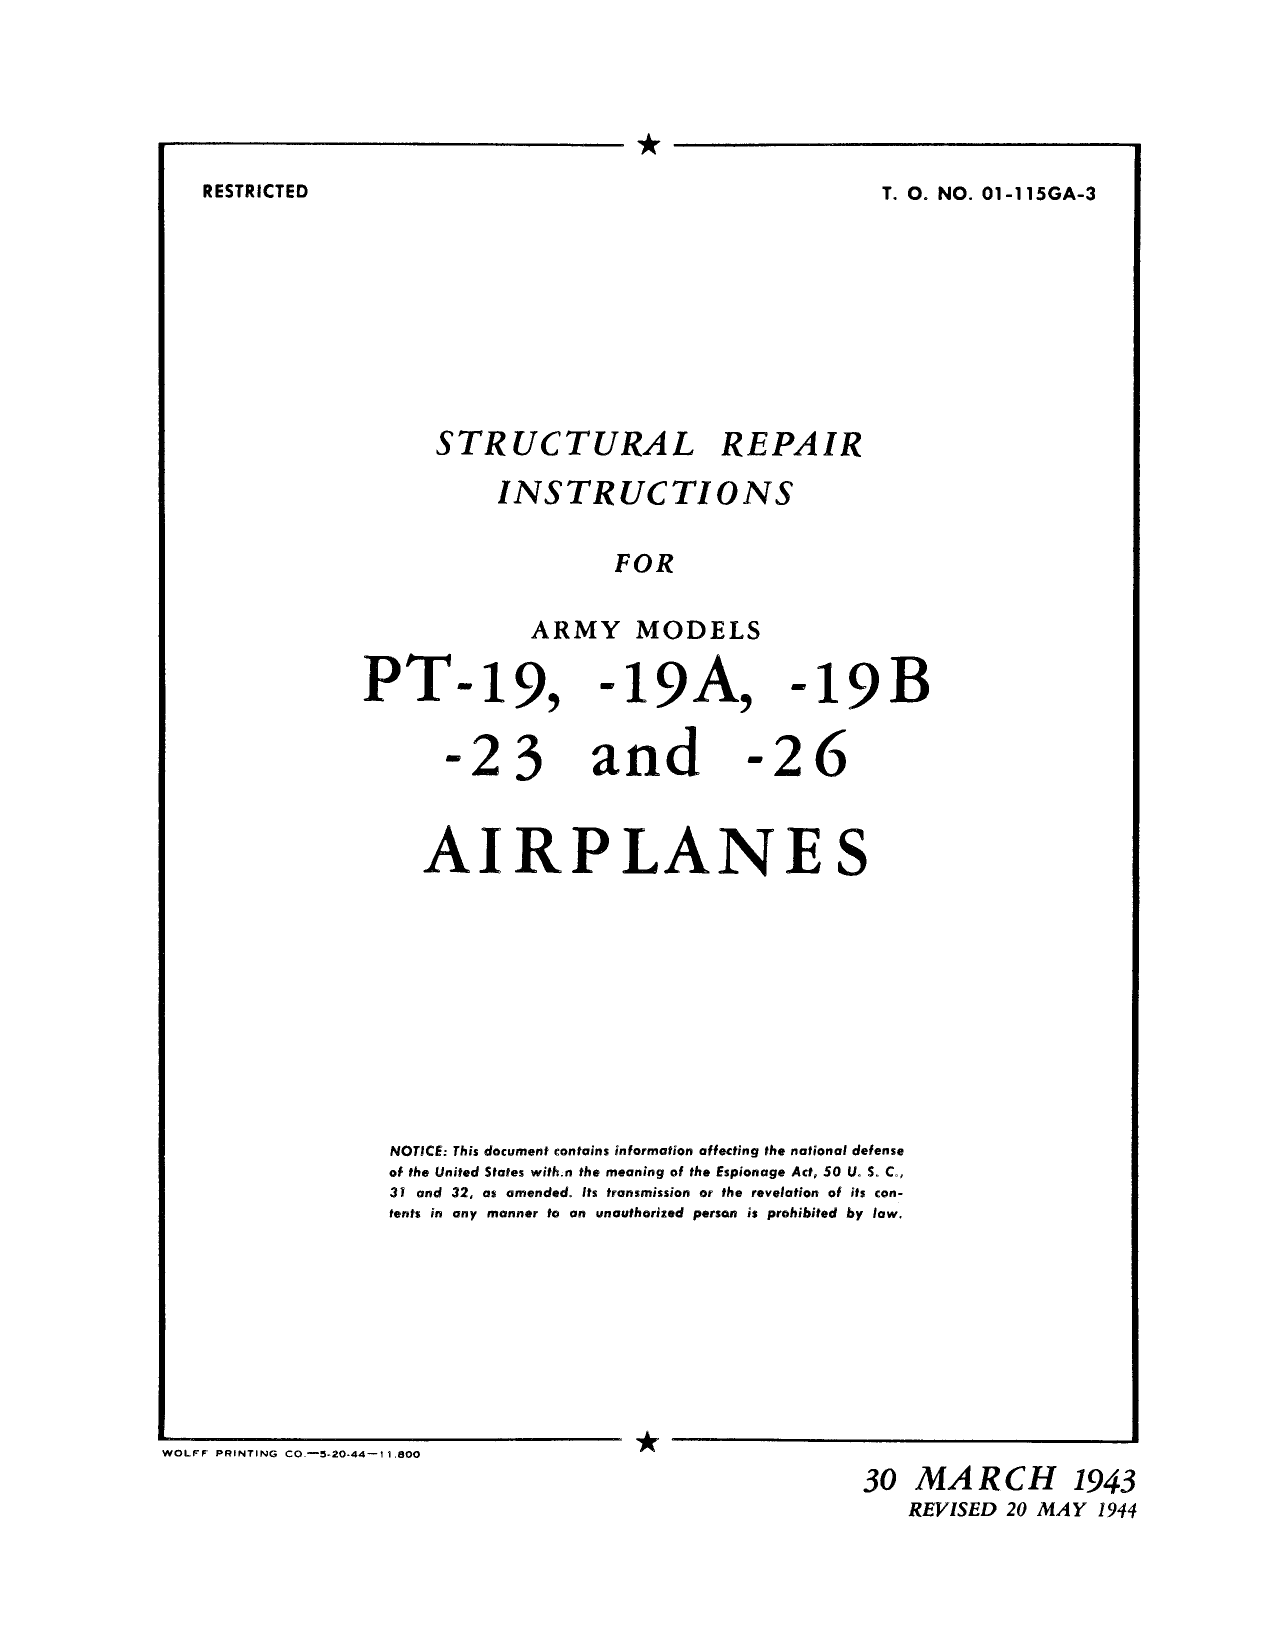 Sample page 1 from AirCorps Library document: Structural Repair Instructions for PT-19 Series